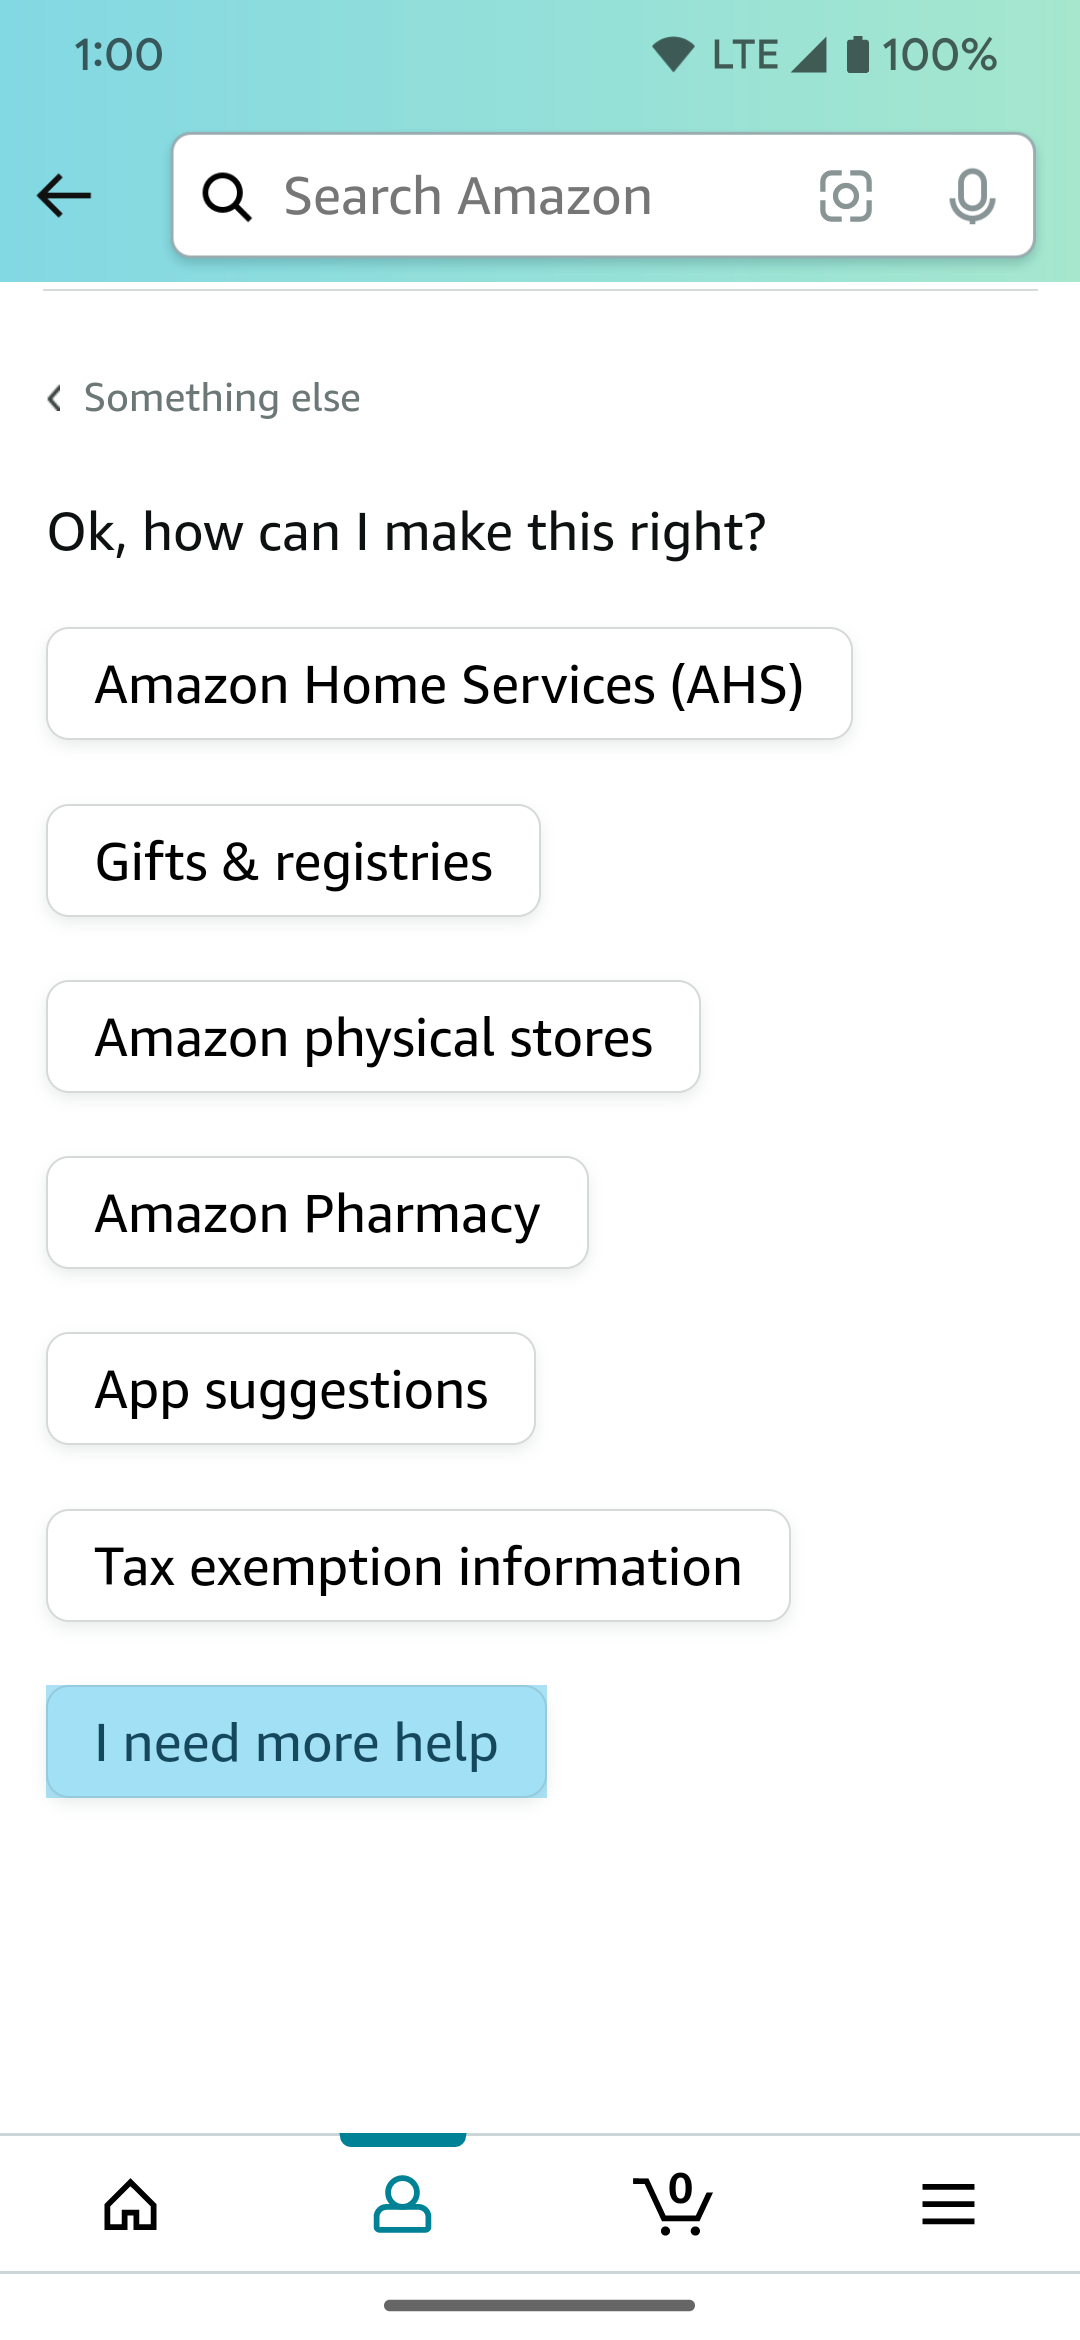 This shows how to launch the Amazon chatbot in the Android app